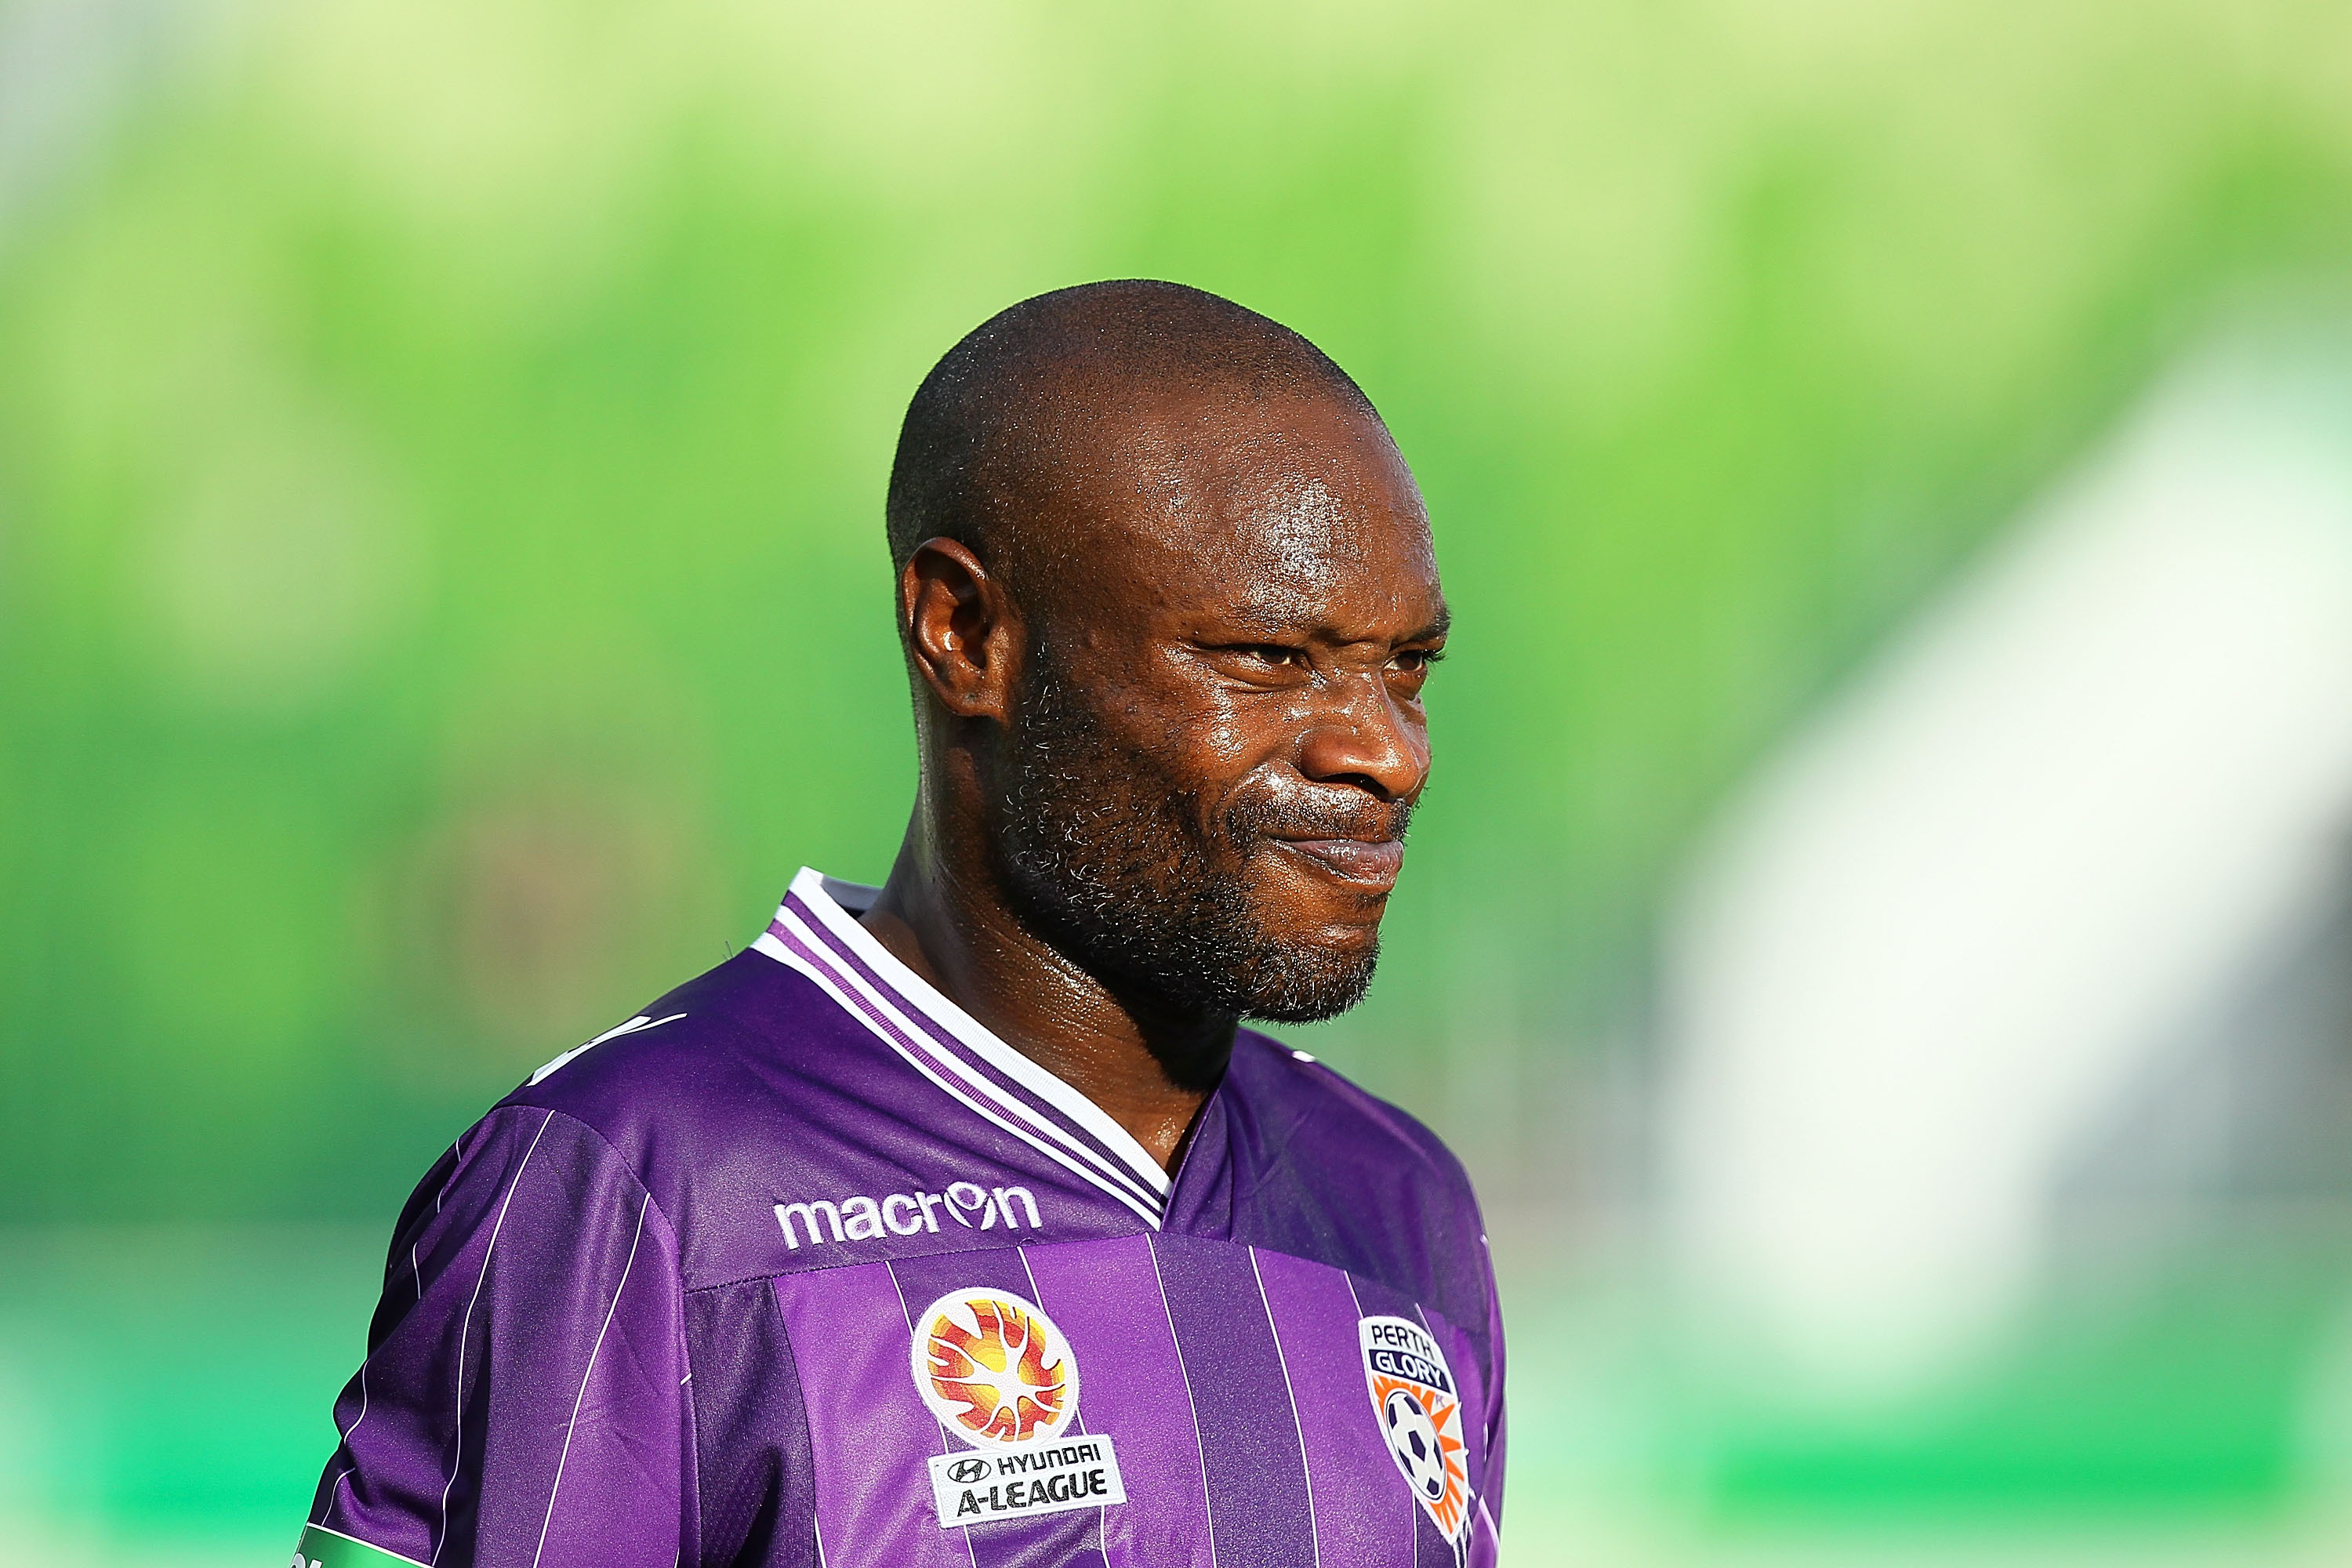 William Gallas Formerly Of Arsenal Chelsea Spurs And France Retires Aged 37 Bleacher Report Latest News Videos And Highlights